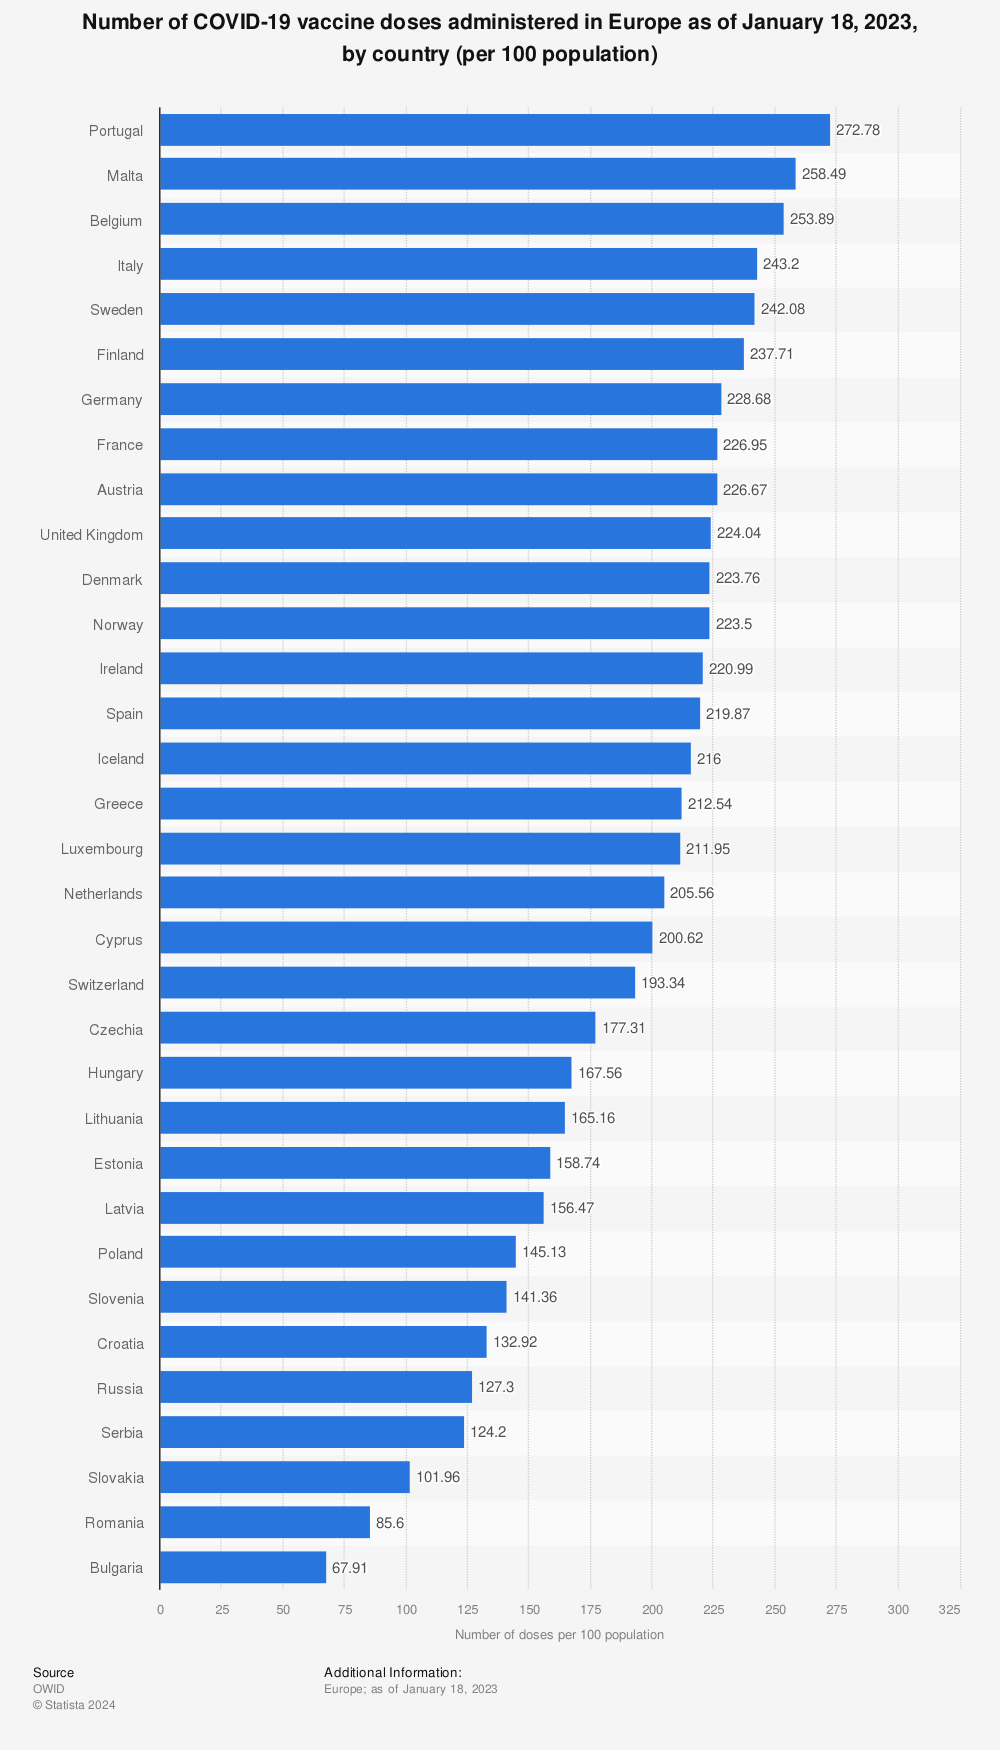 Statistic: Number of COVID-19 vaccine doses administered in Europe as of March 28, 2022, by country (per 100 population) | Statista